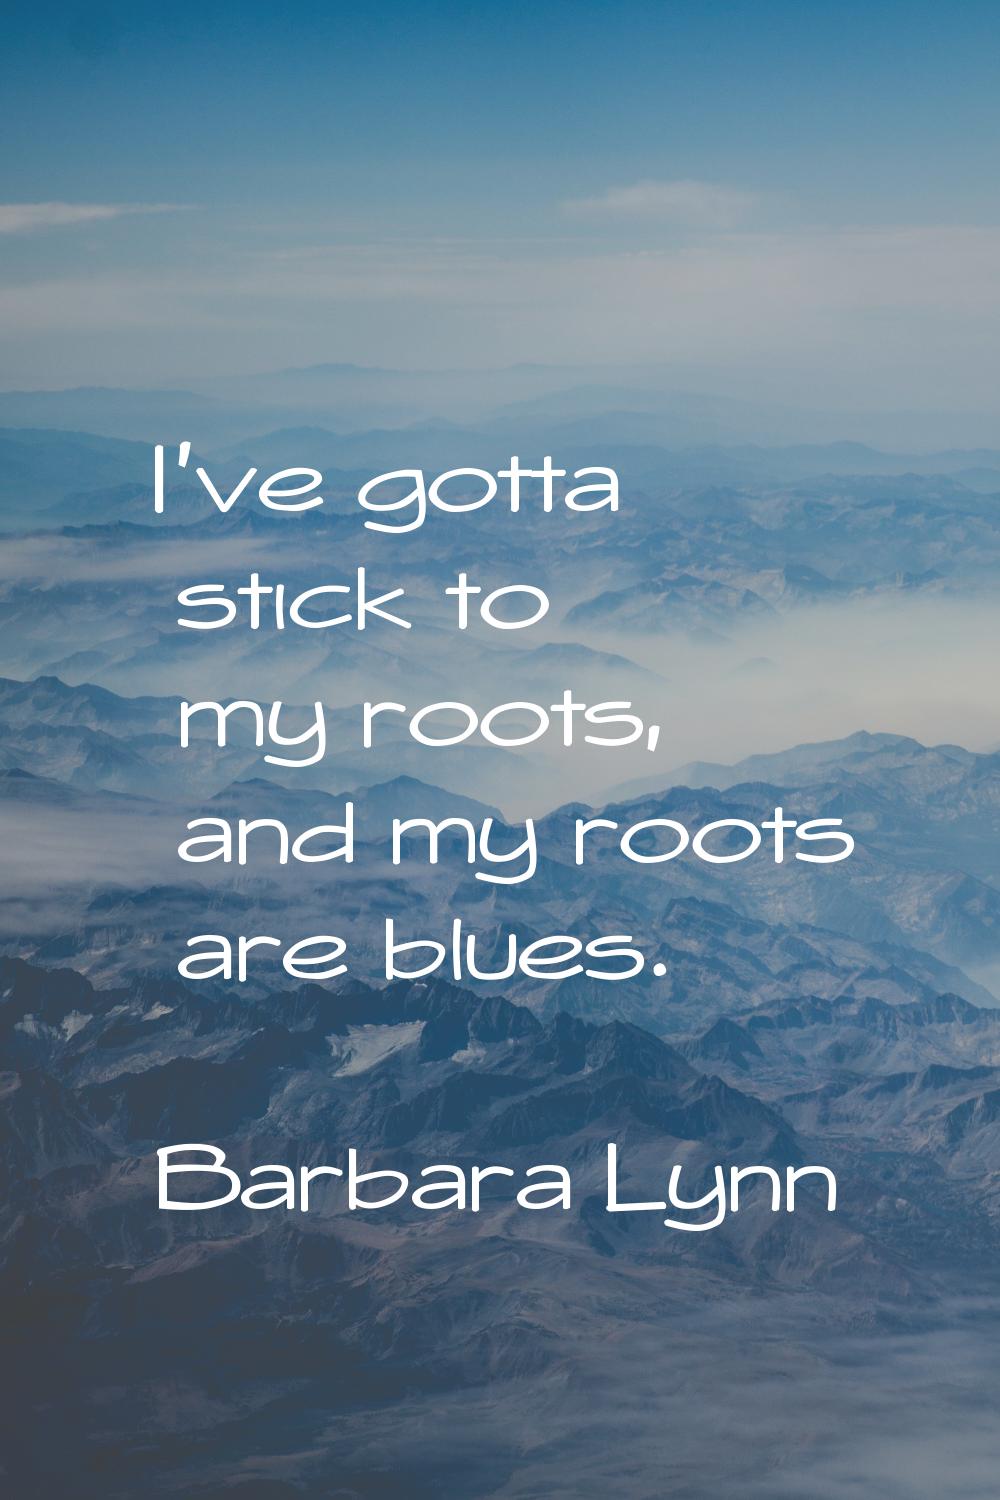 I've gotta stick to my roots, and my roots are blues.